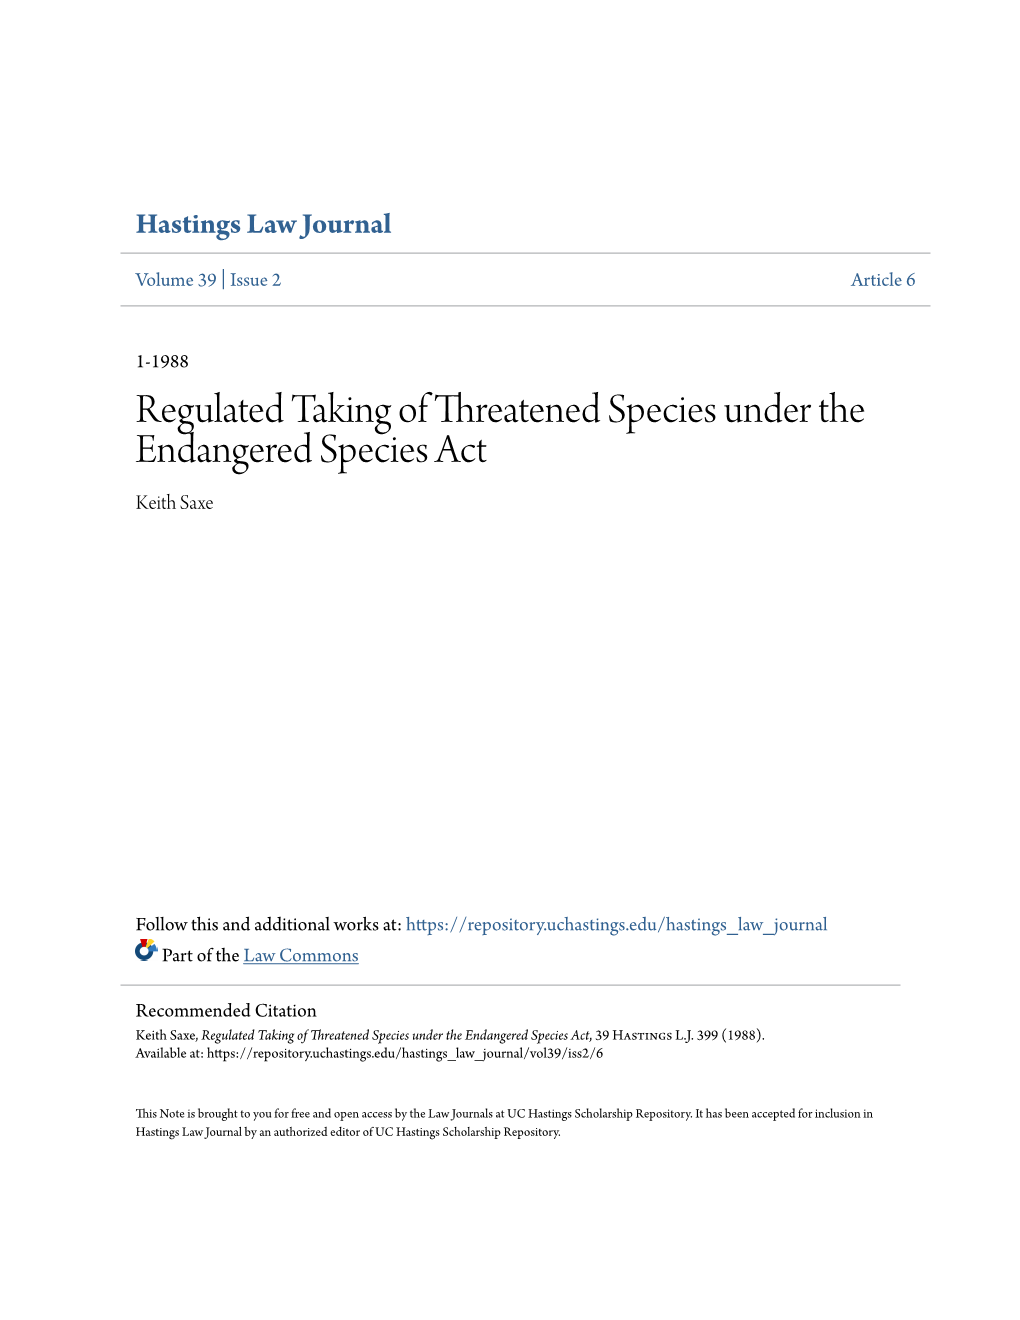 Regulated Taking of Threatened Species Under the Endangered Species Act Keith Saxe